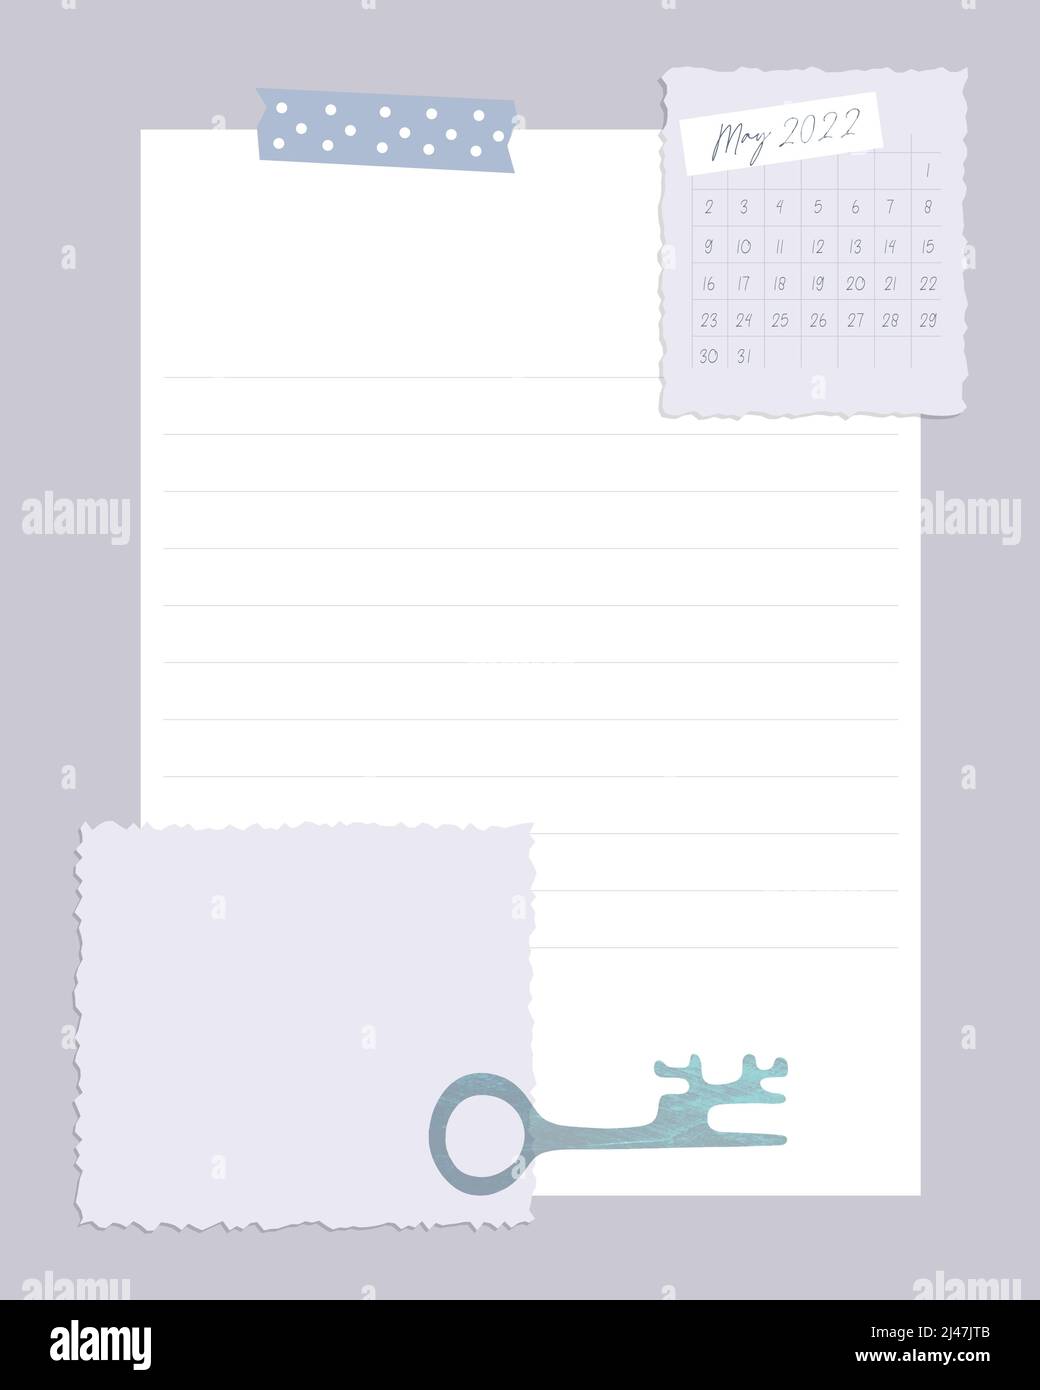 Reminders Template witch Calendar May 2022 To do list, scrapbooking, ideas, notes, plans, vintage. Vector illustration Stock Vector